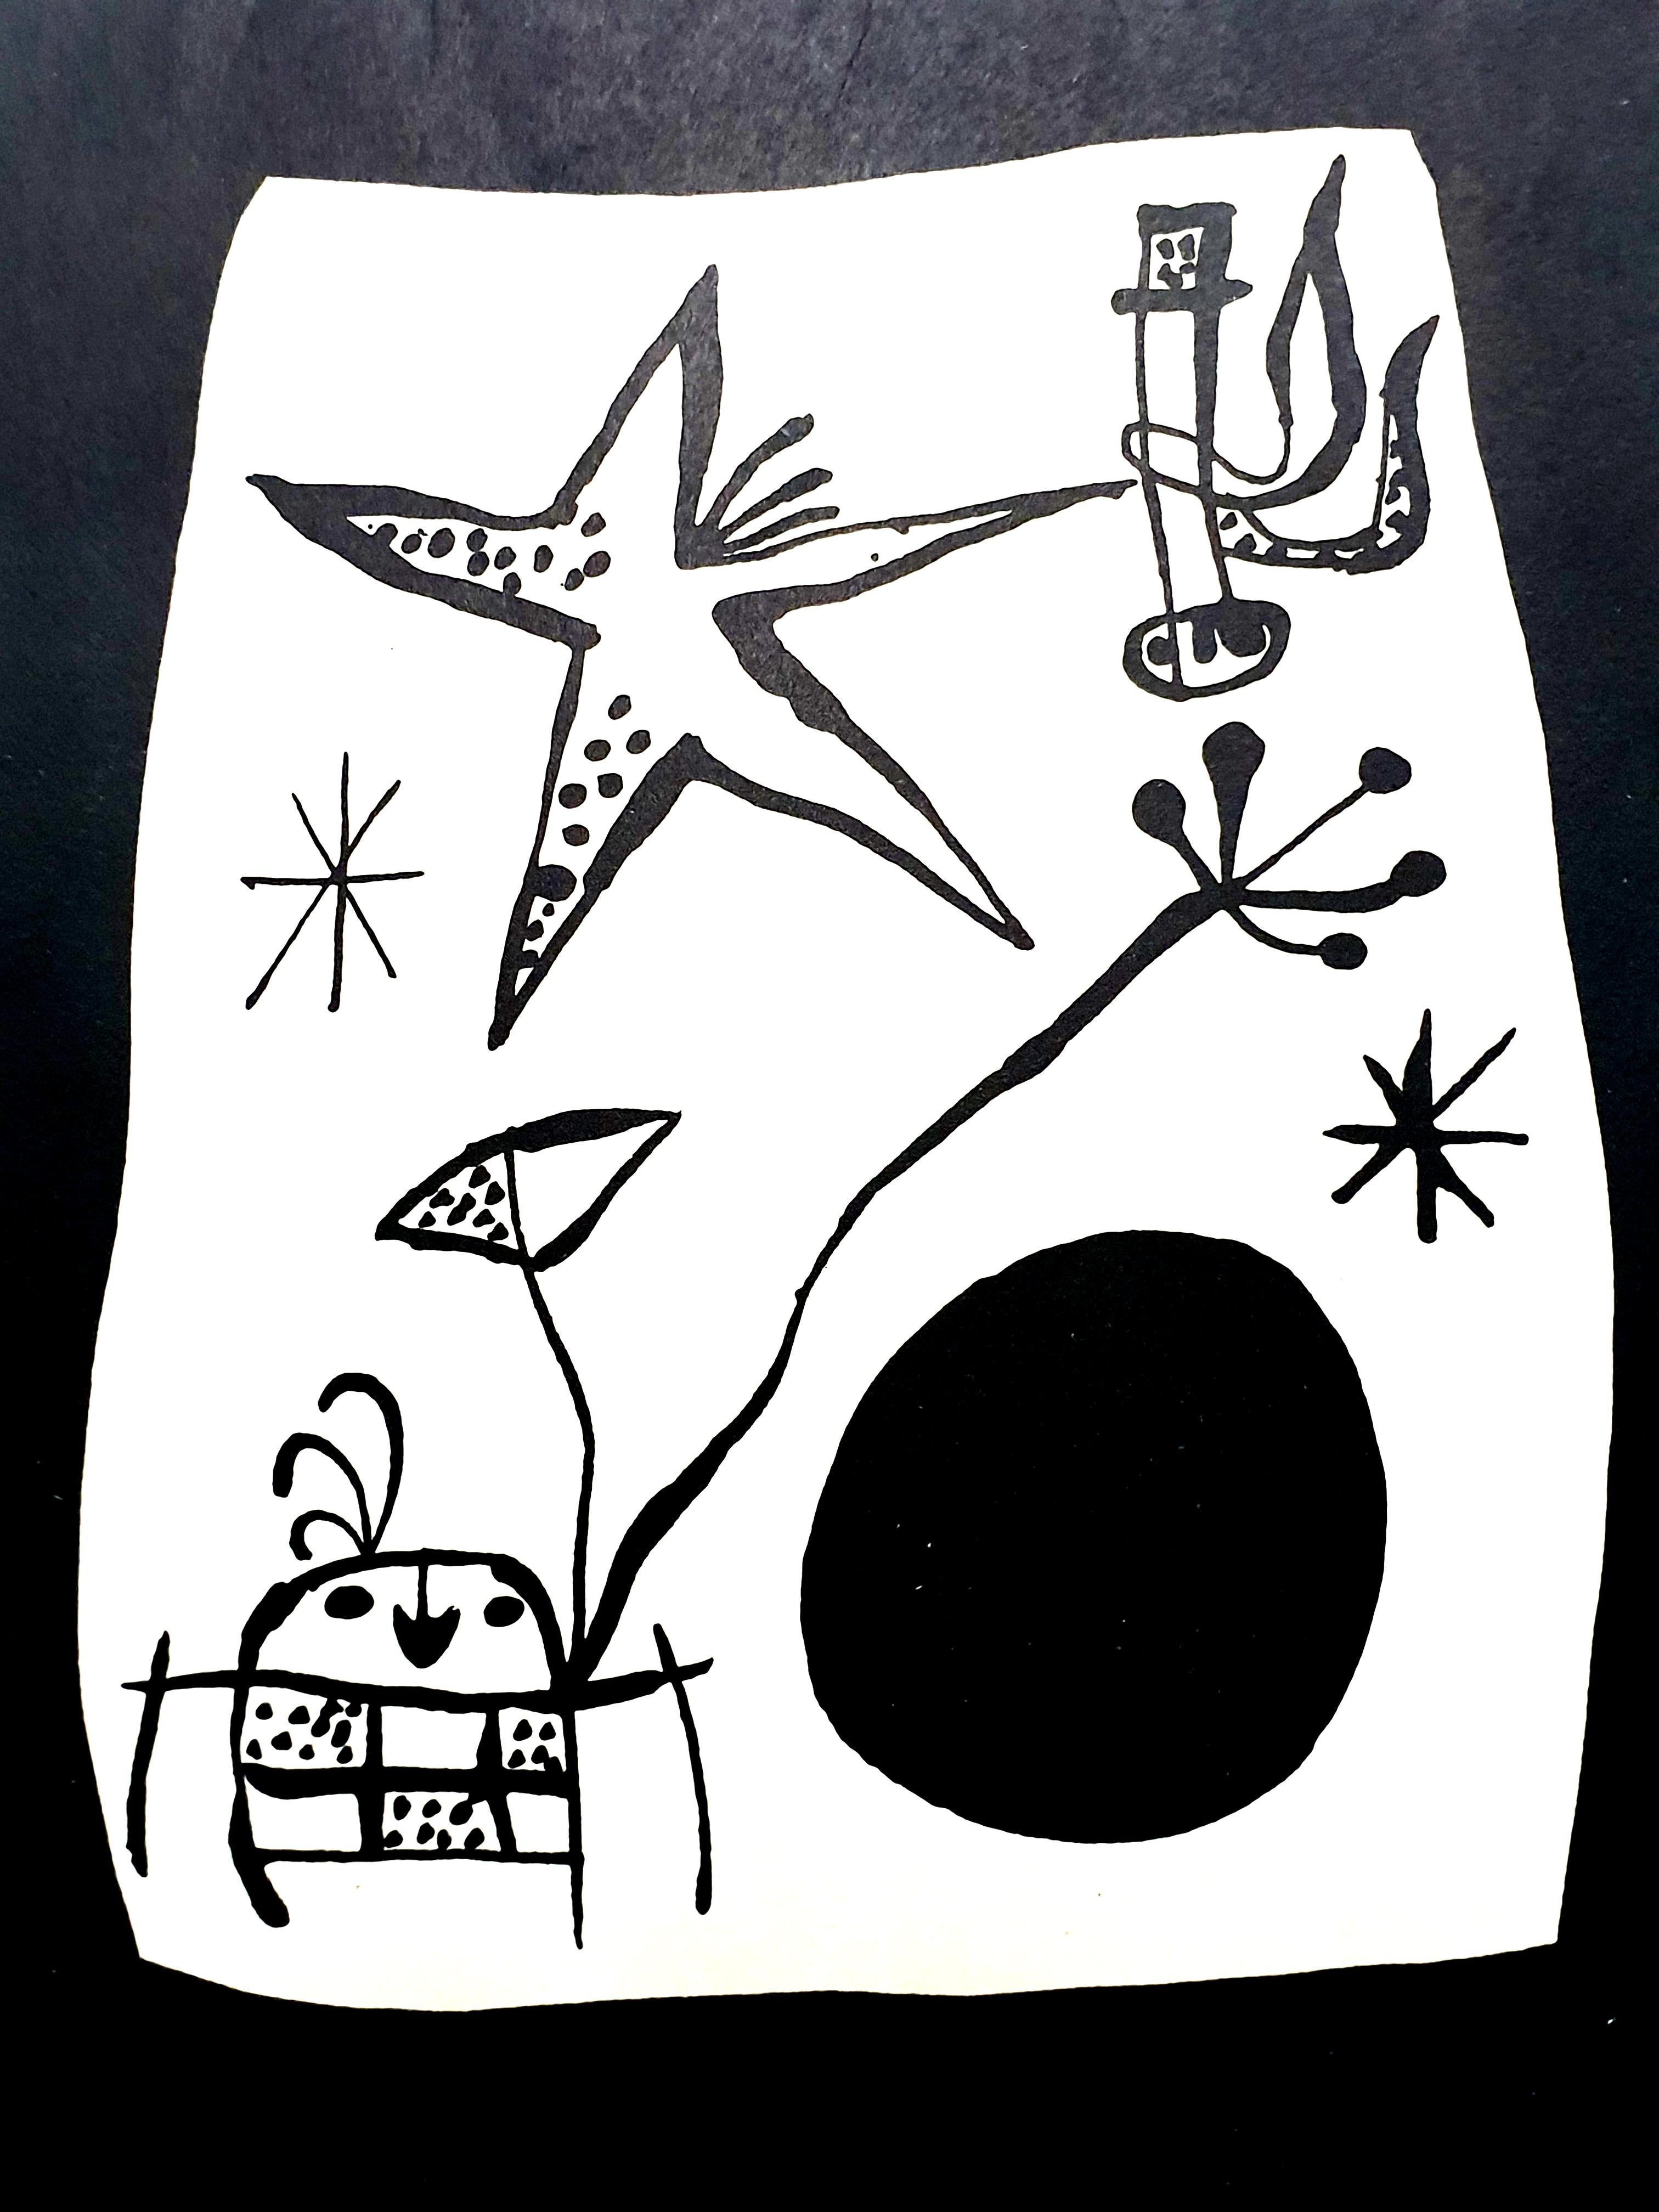 Back Cover, from Joan Miro by Jacques Prevert and Georges Ribemont-Dessaignes - Print by Joan Miró